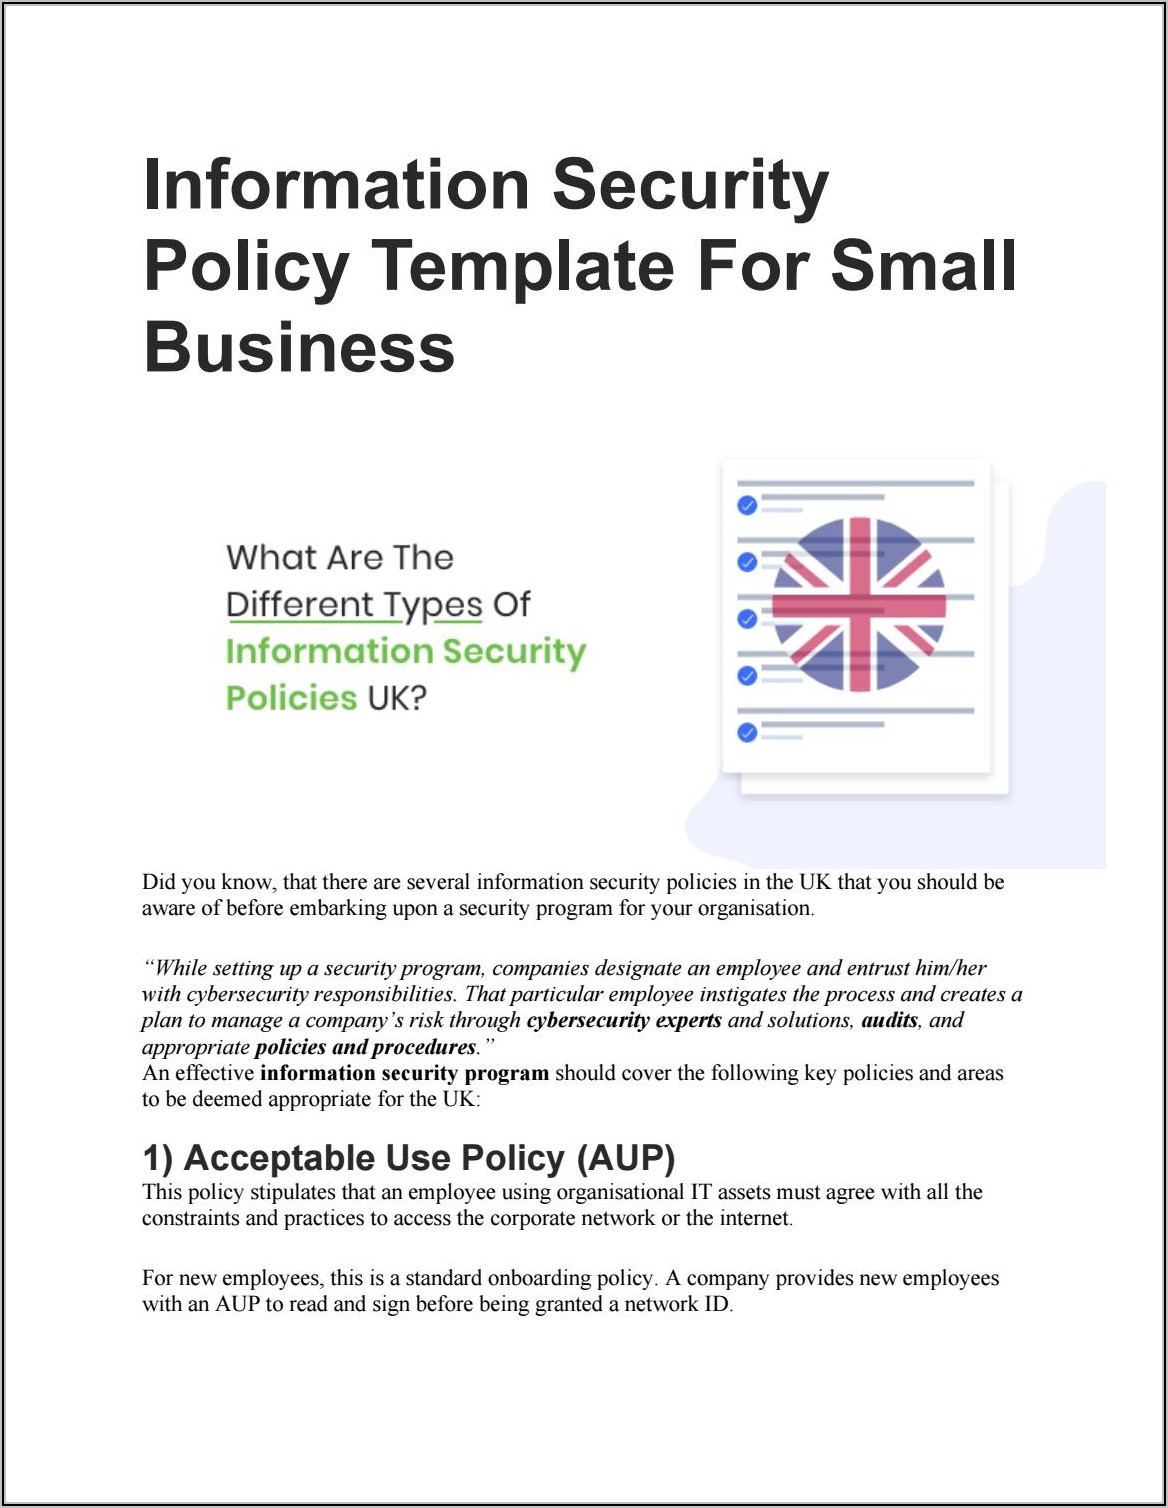 Information Security Policy Template For Small Business